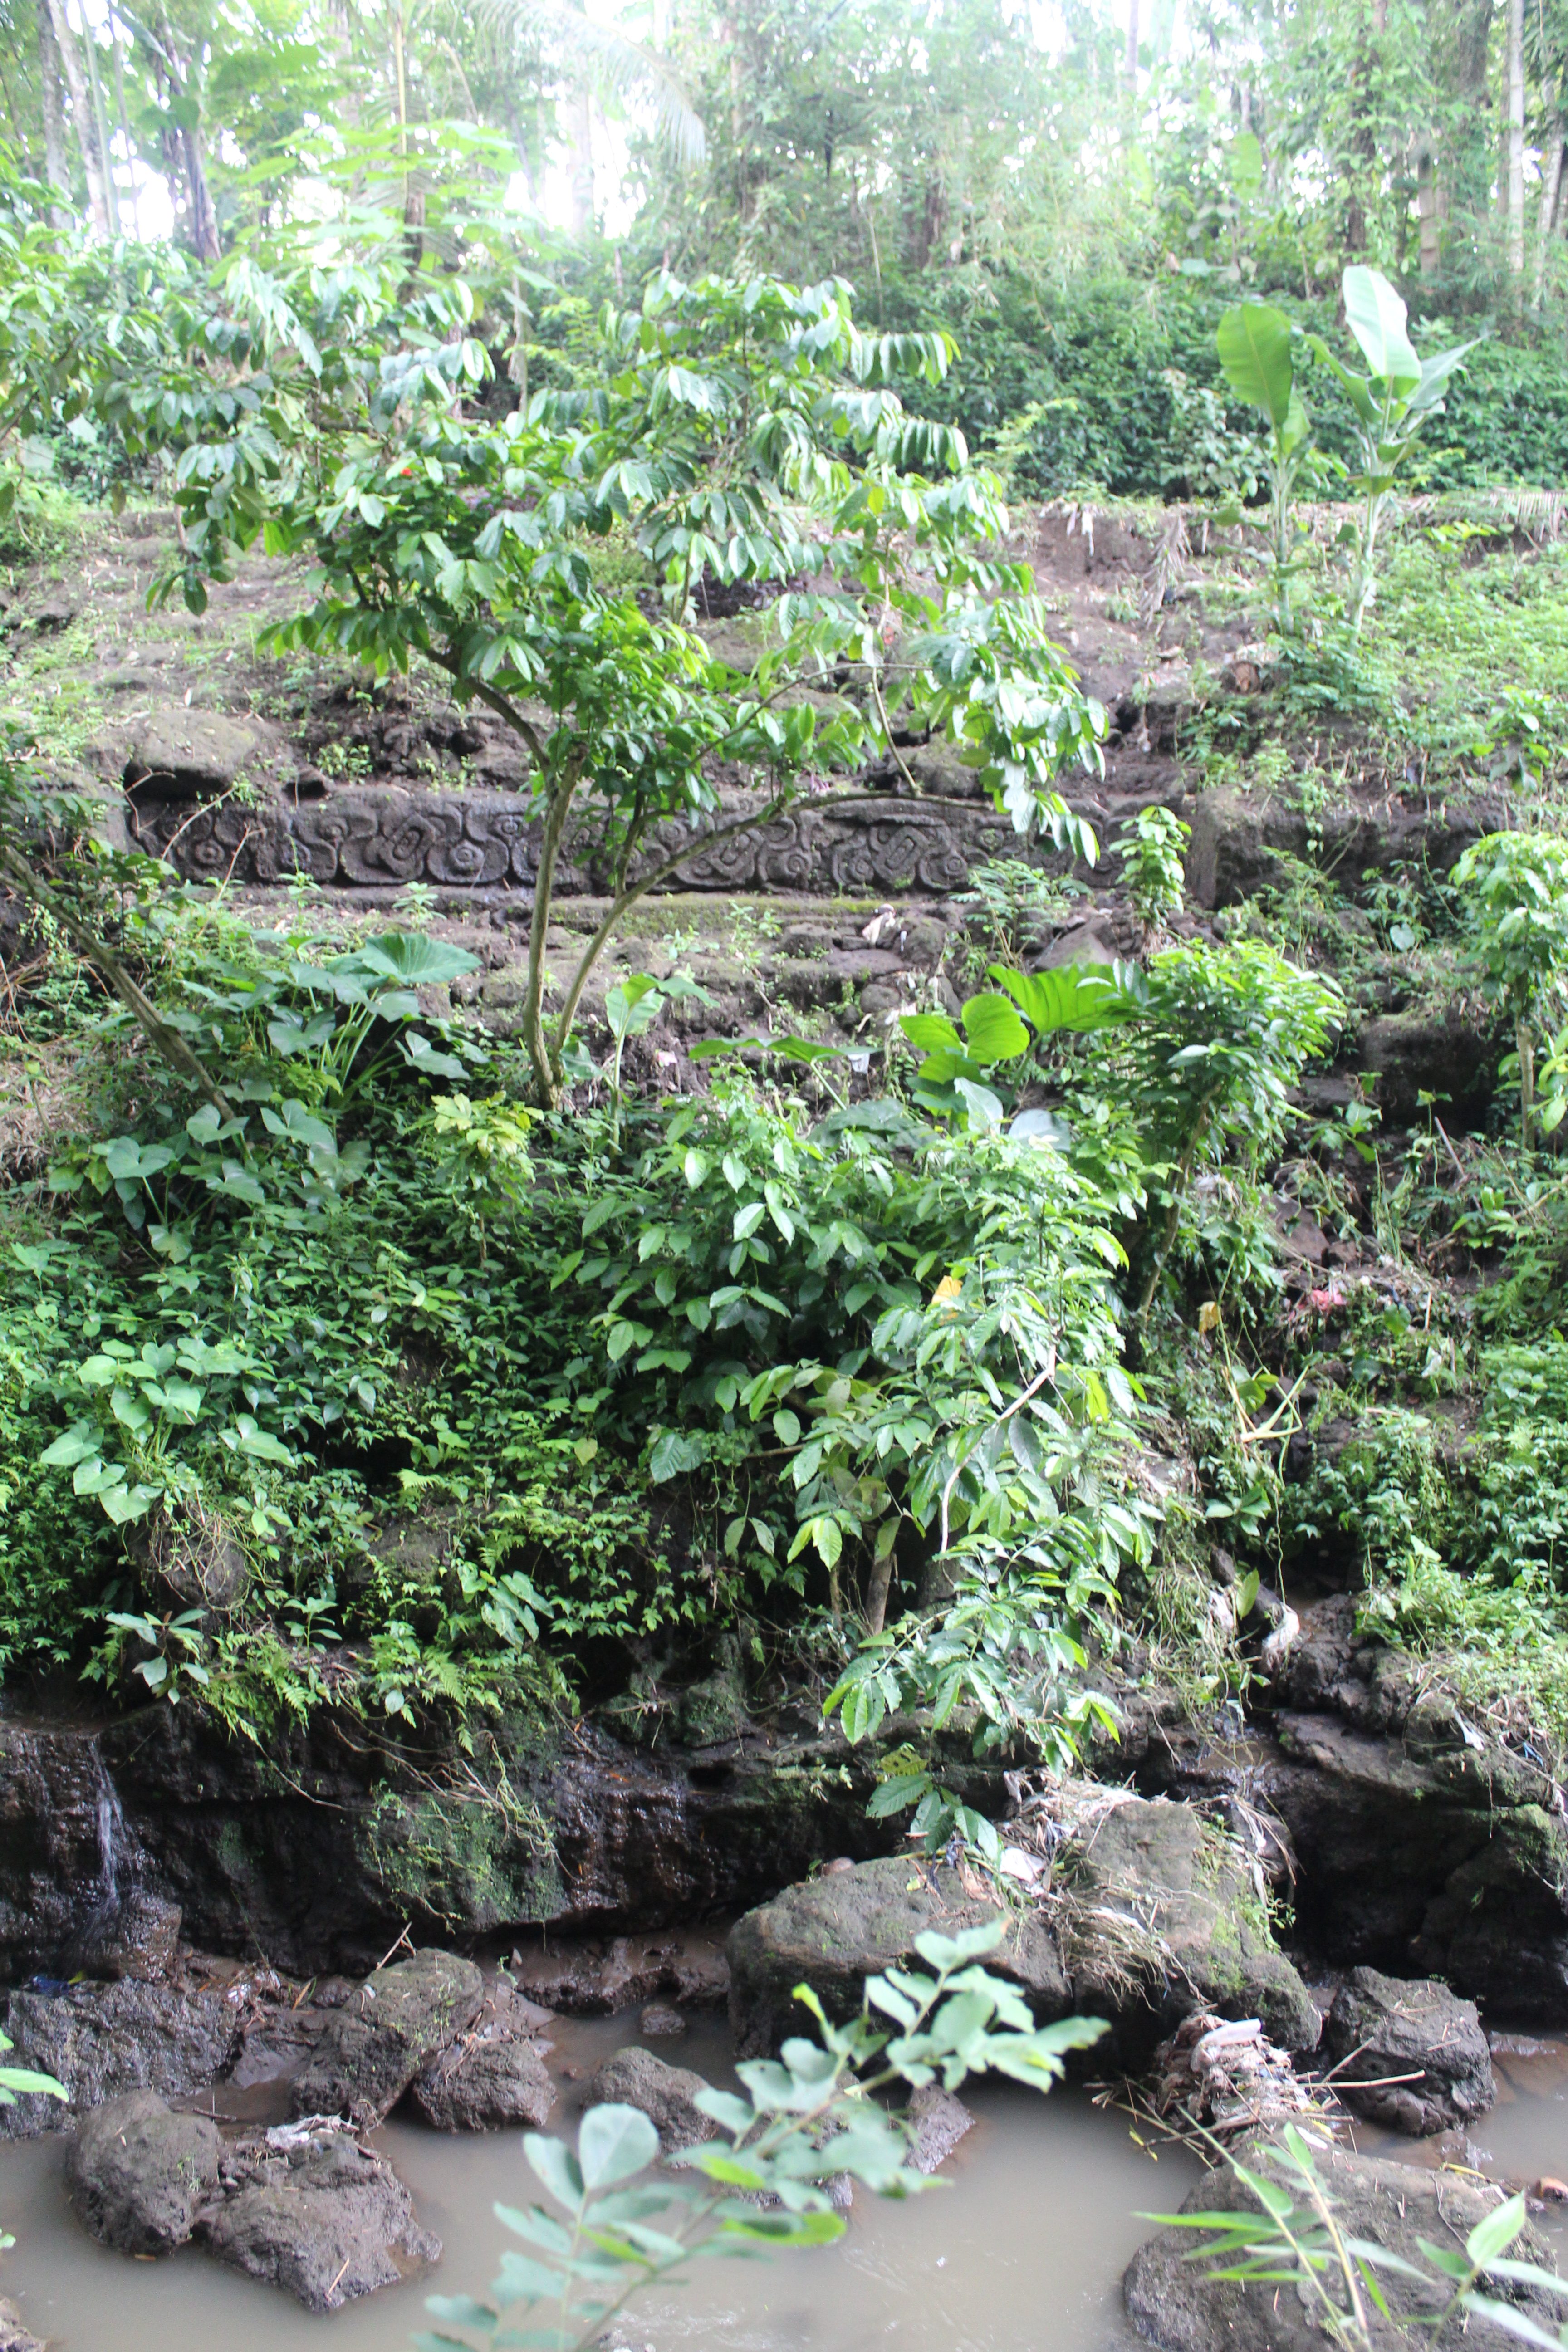 Bathing site with ornamental carvings along a rivine